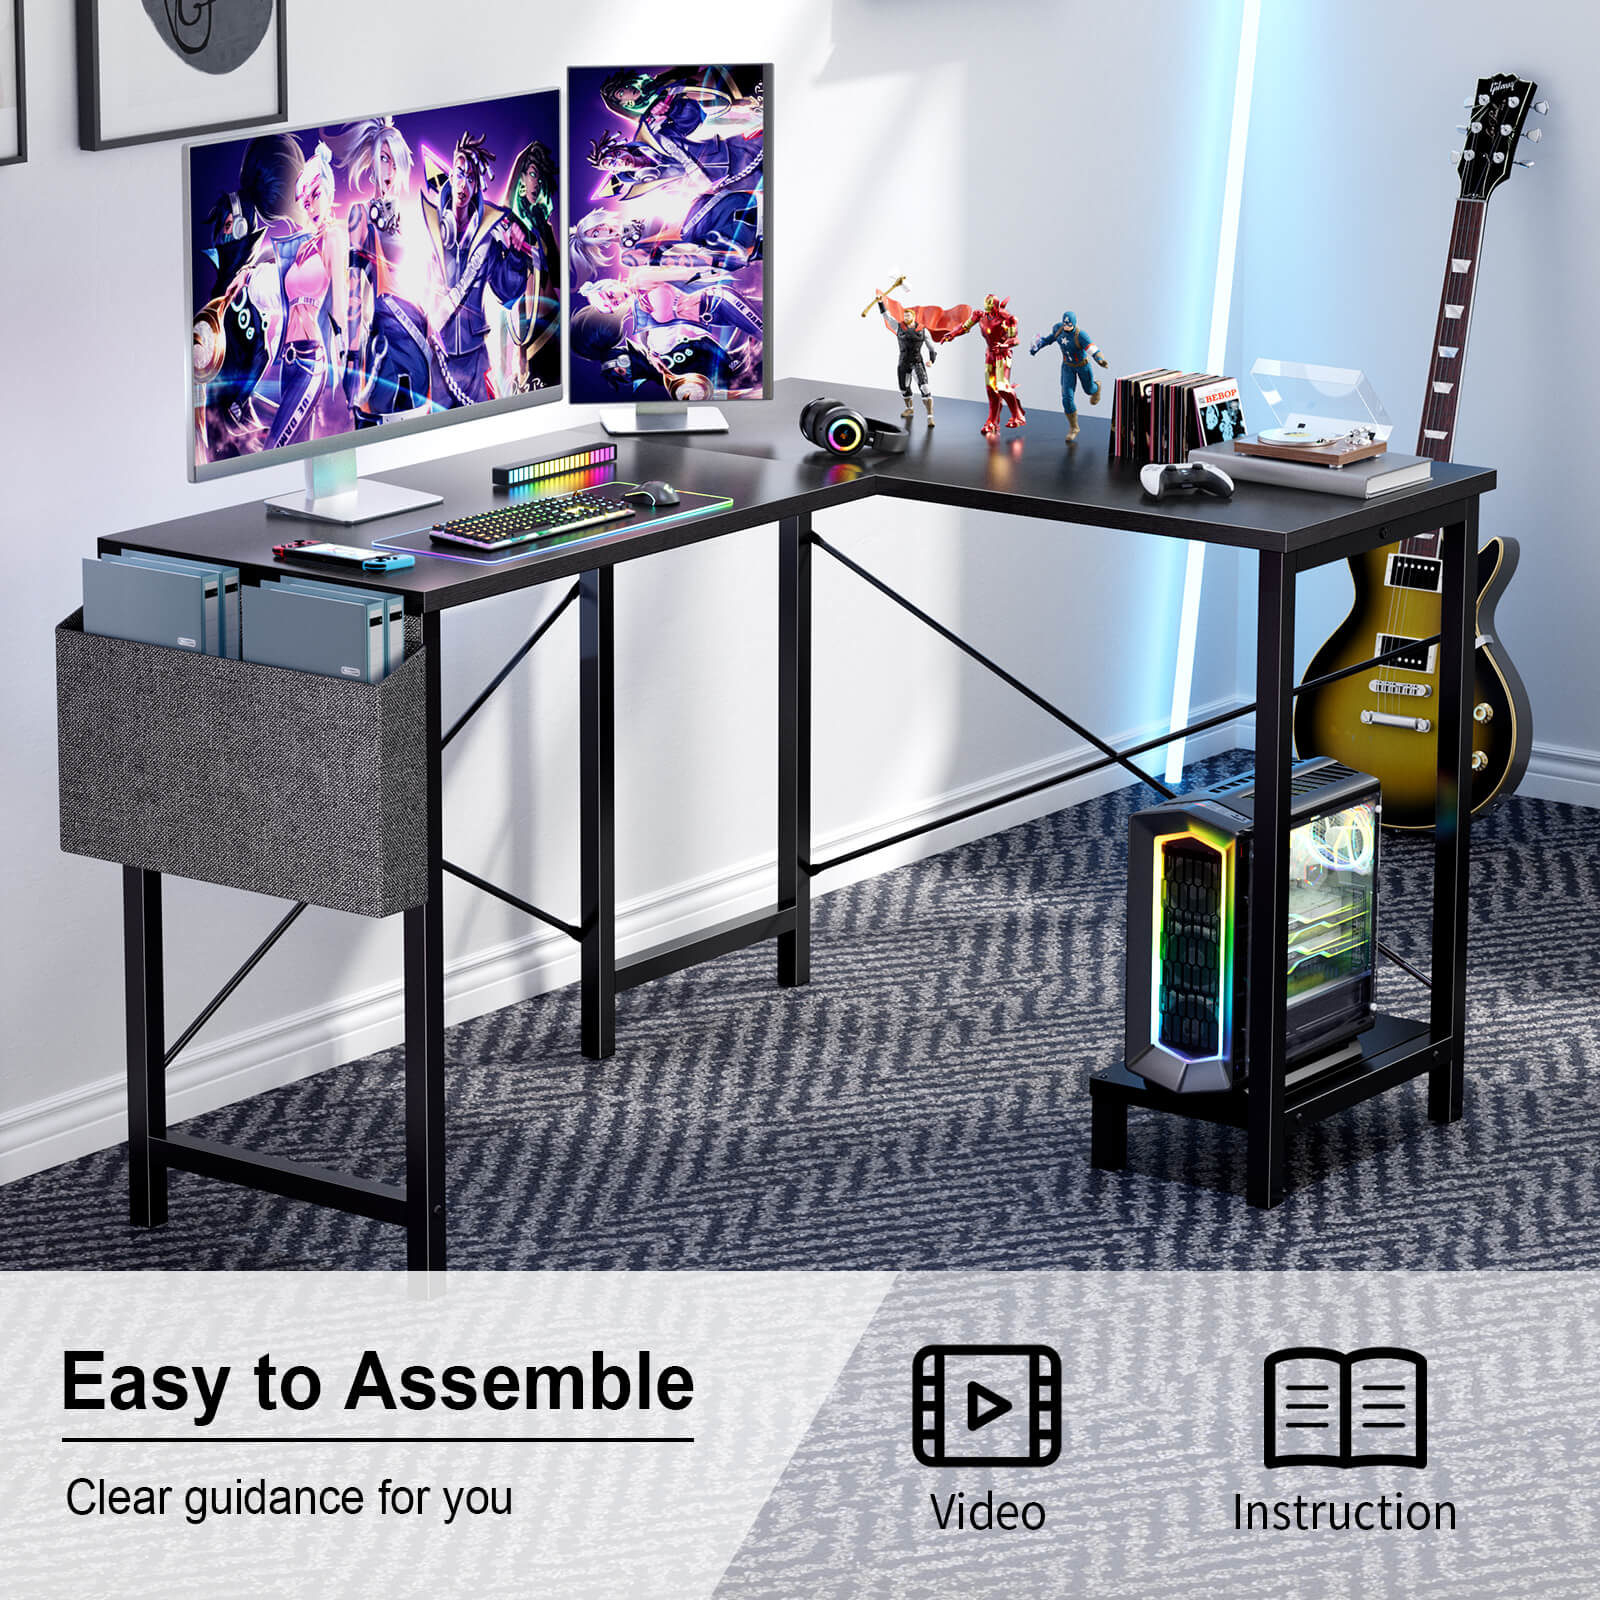 L-Shaped Computer Desk - 50" Corner Gaming Table with Console Shelf and Side Storage Pocket for Office, Bedroom, Living Room